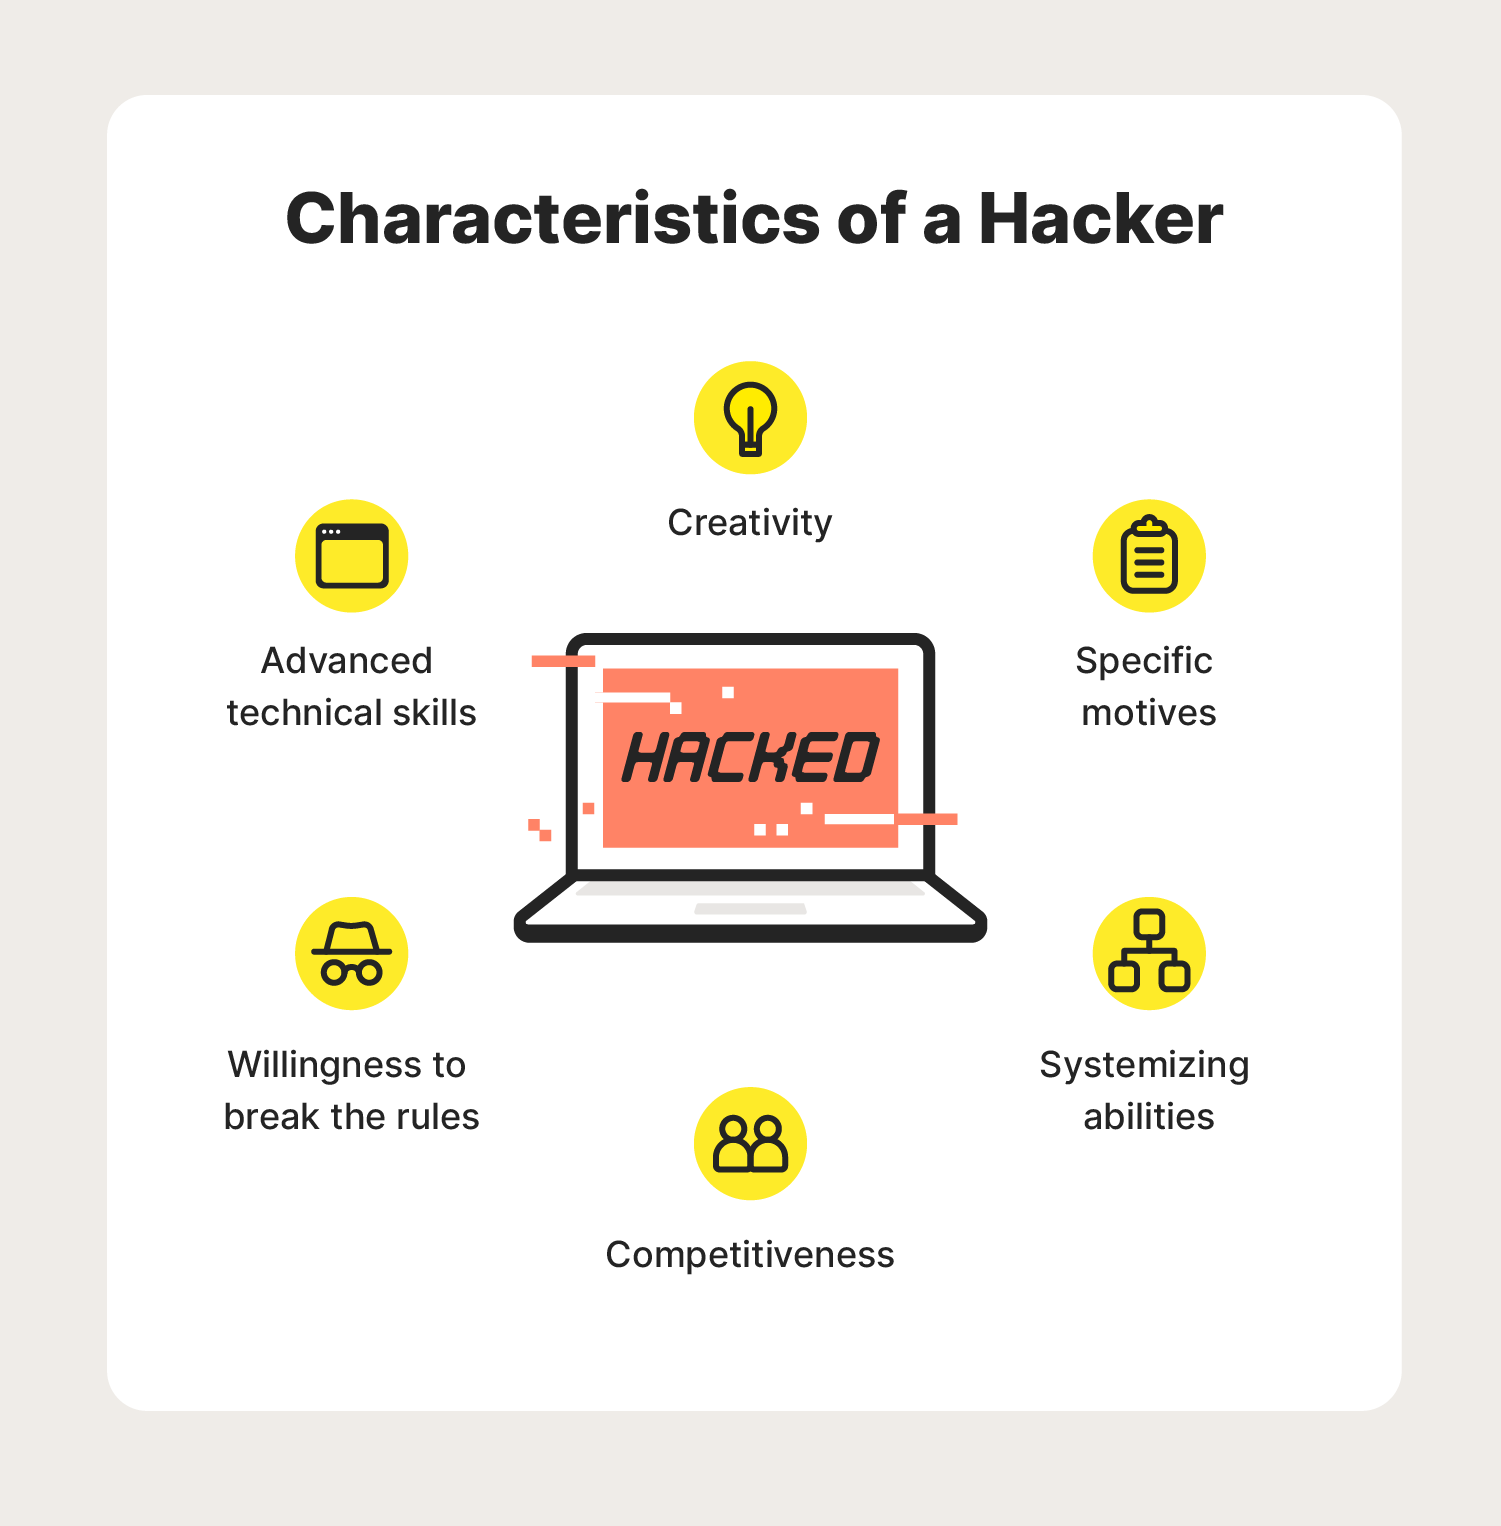 A graphic lists the characteristics of a hacker, further answering the question, “What is a hacker?”